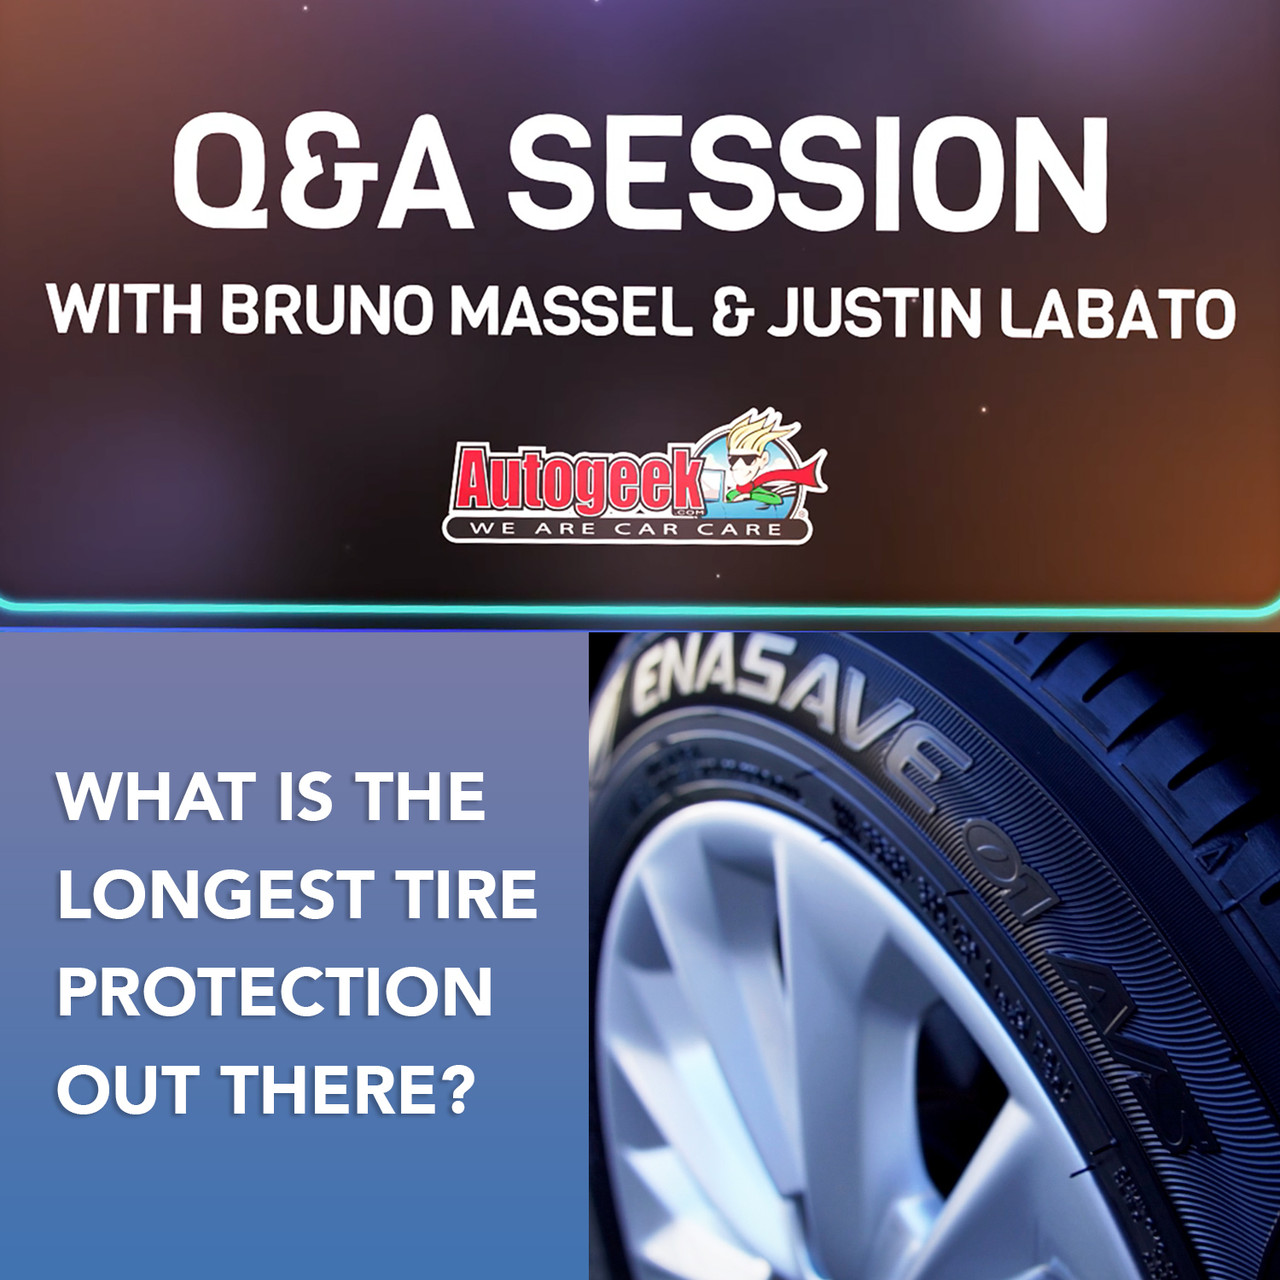 What is the Longest Tire Protection out there?